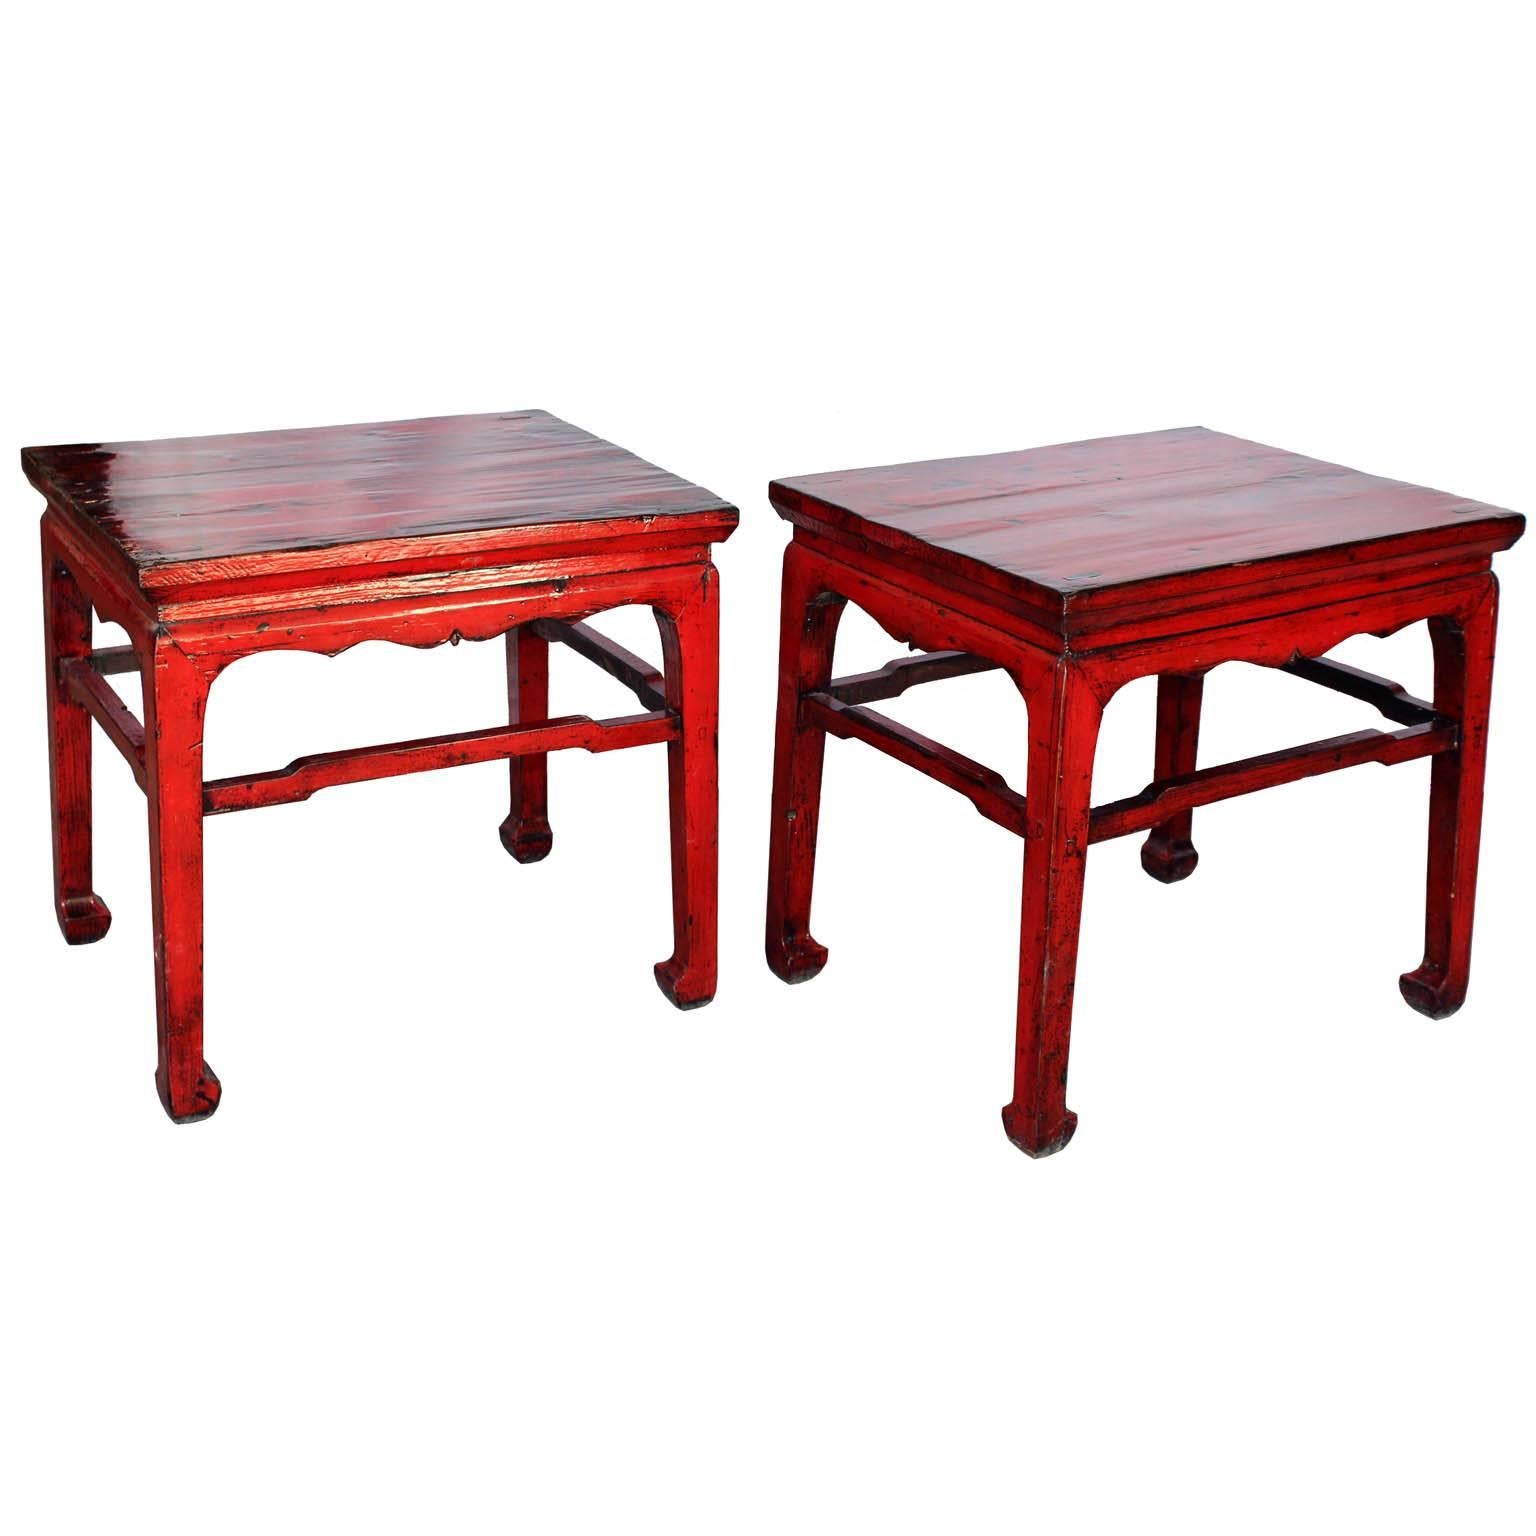 Pair of red lacquer tables with scalloped lip, support bars and horse hoof-style feet. Use in front of a sofa as coffee tables or as a side table next to an armchair. China, circa 1900.